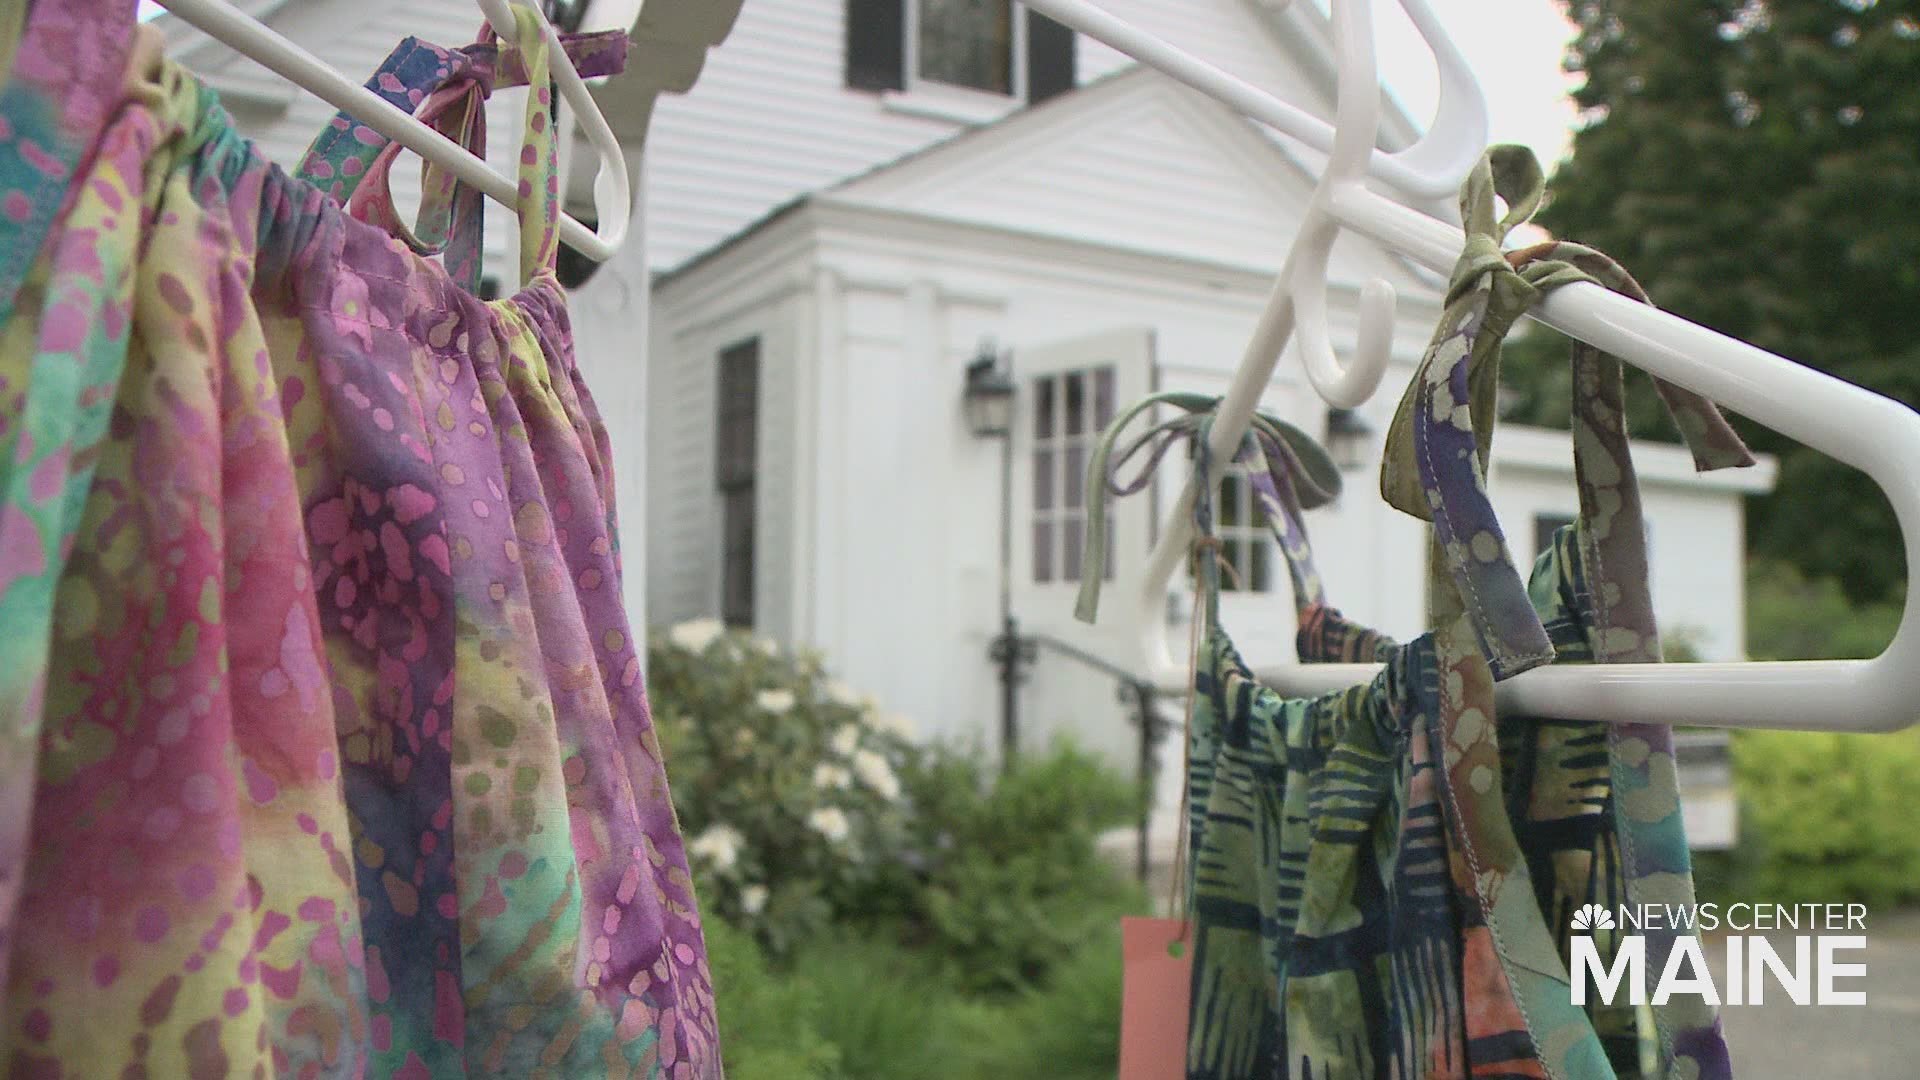 There's an ever growing group in Maine spending their spare time crafting clothing for people they will likely never meet; with a goal of keeping young girls safe from sex trafficking.